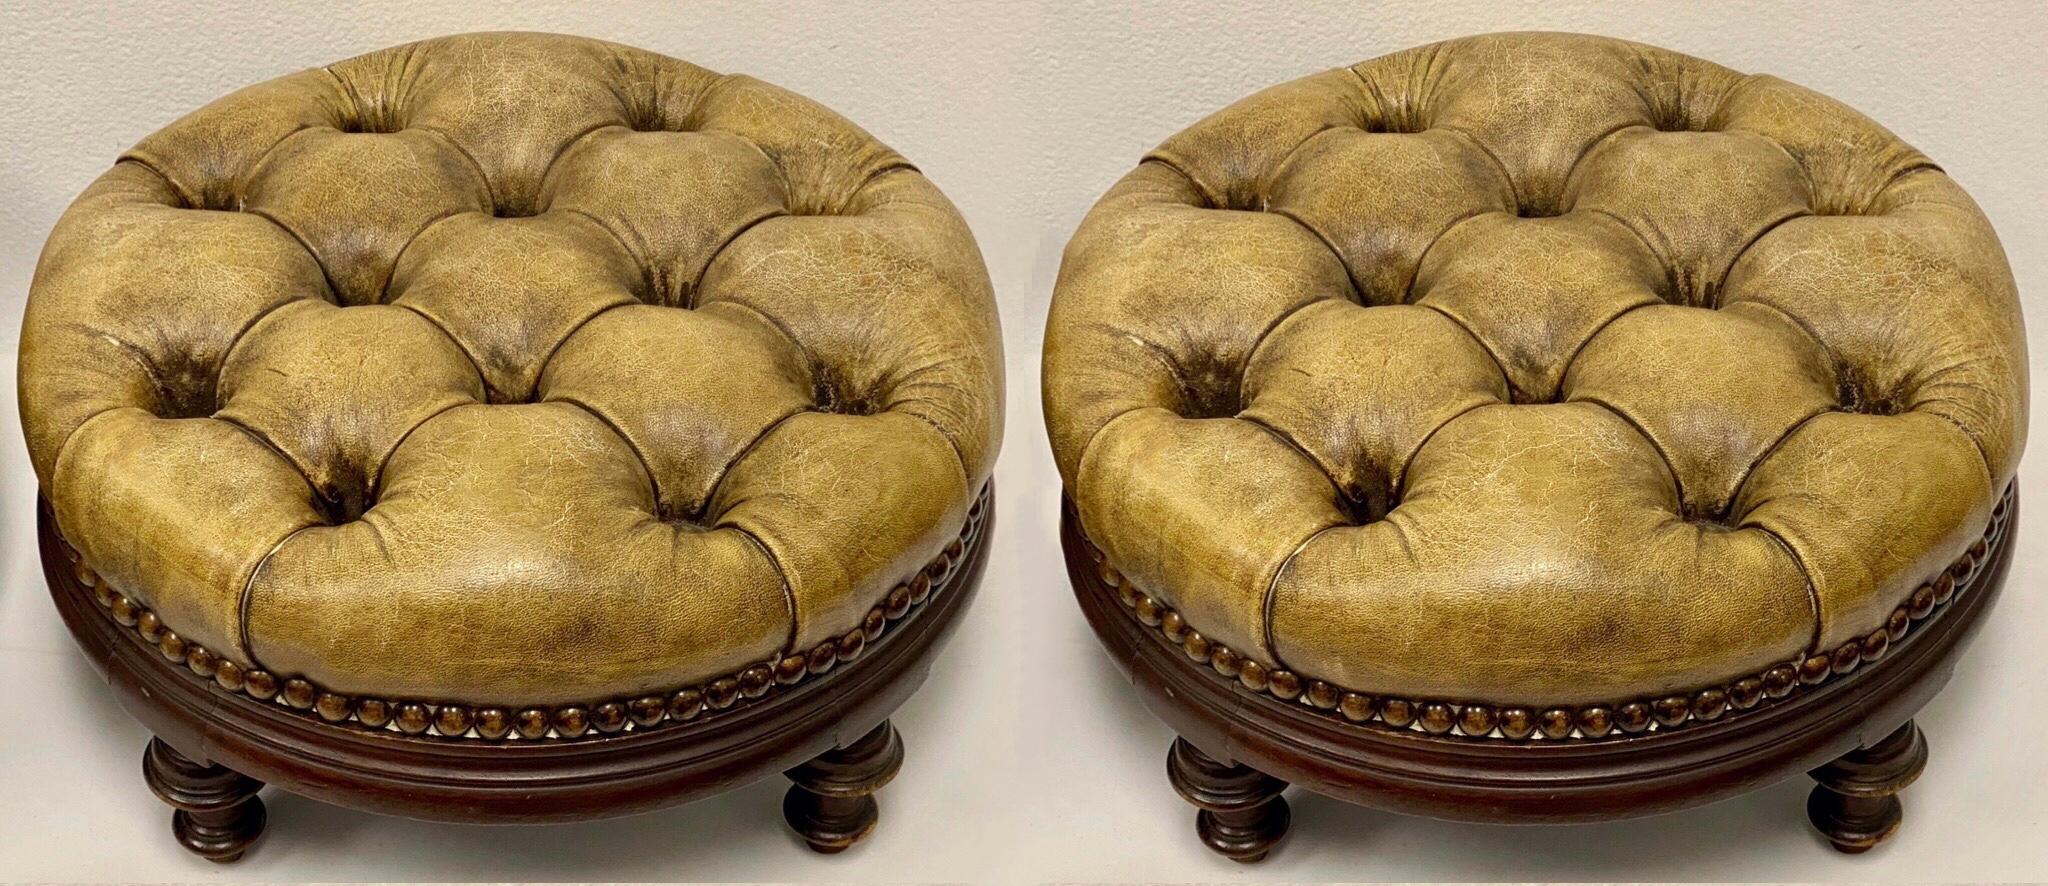 20th Century Early English Tufted Gold Leather Chesterfield Ottomans, a Pair For Sale